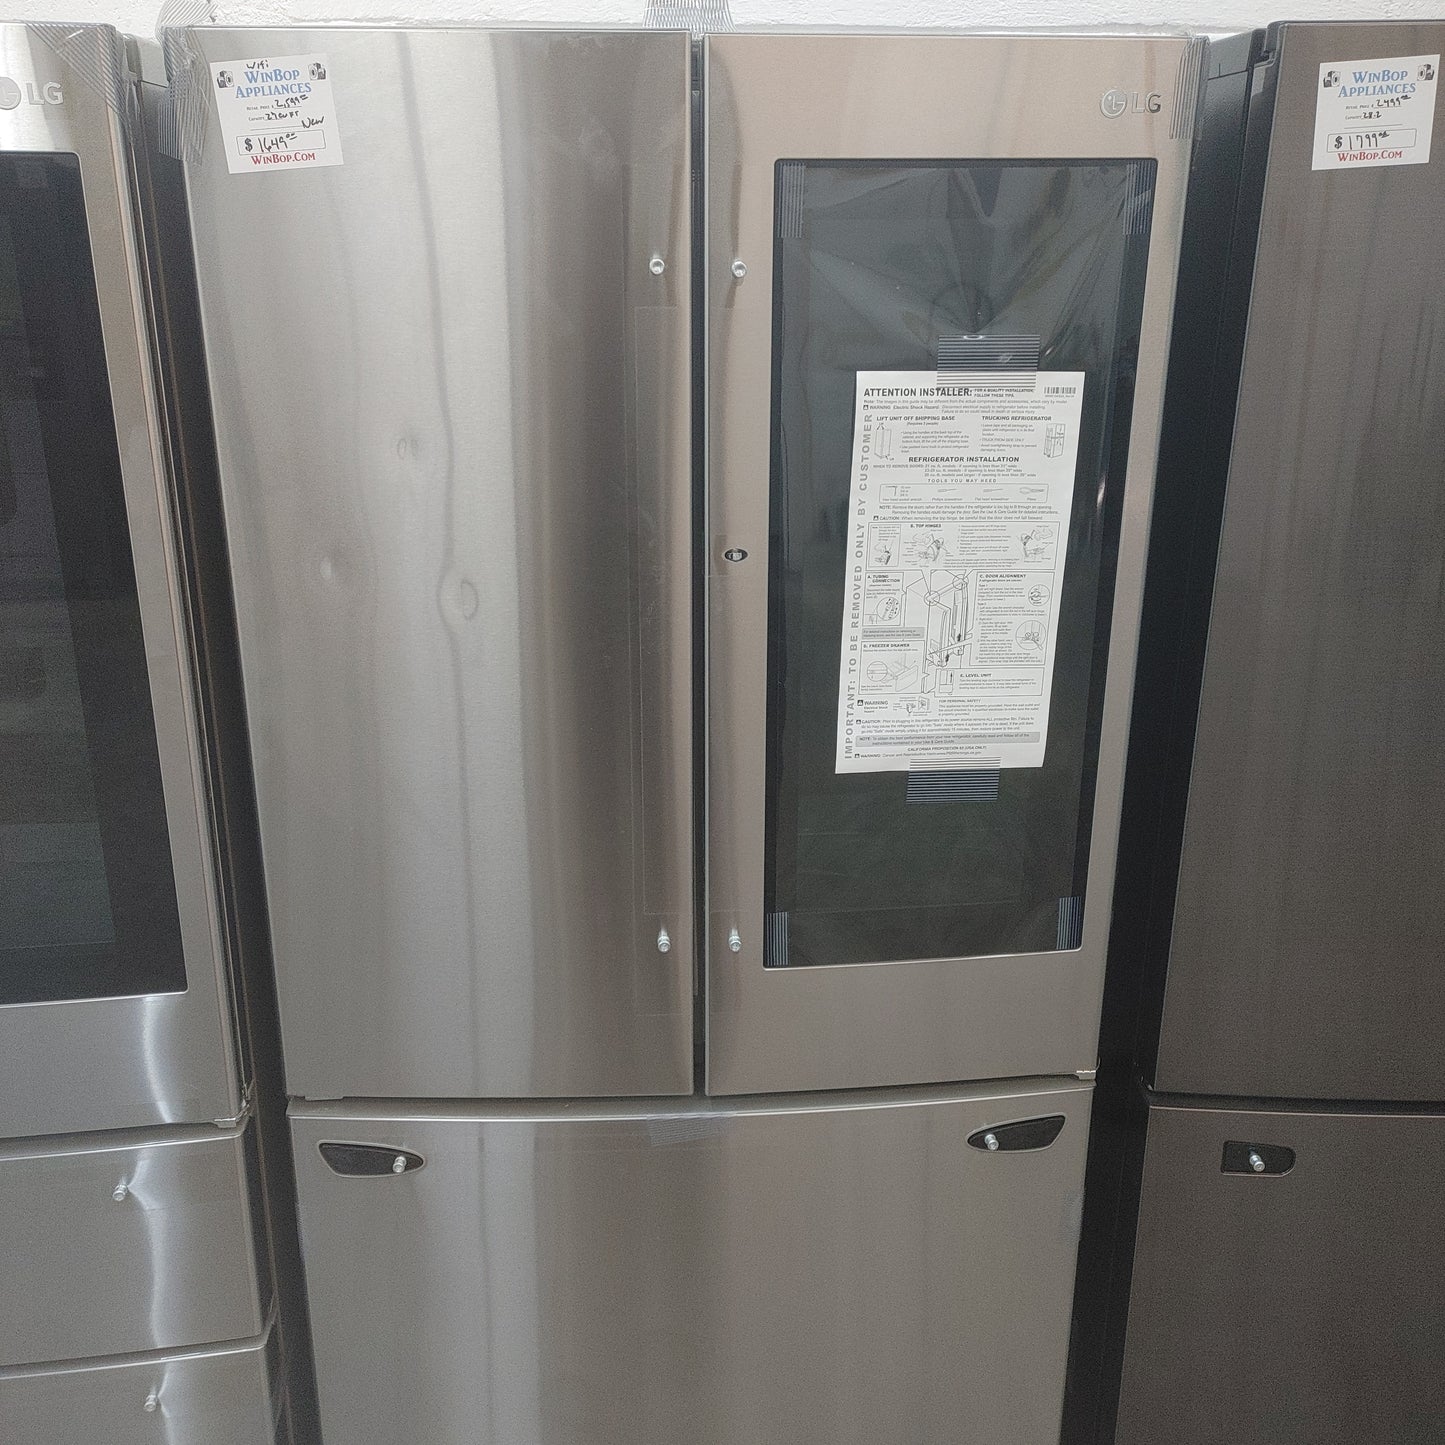 New Dent and Ding LG interview stainless French door refrigerator with Wi-Fi control